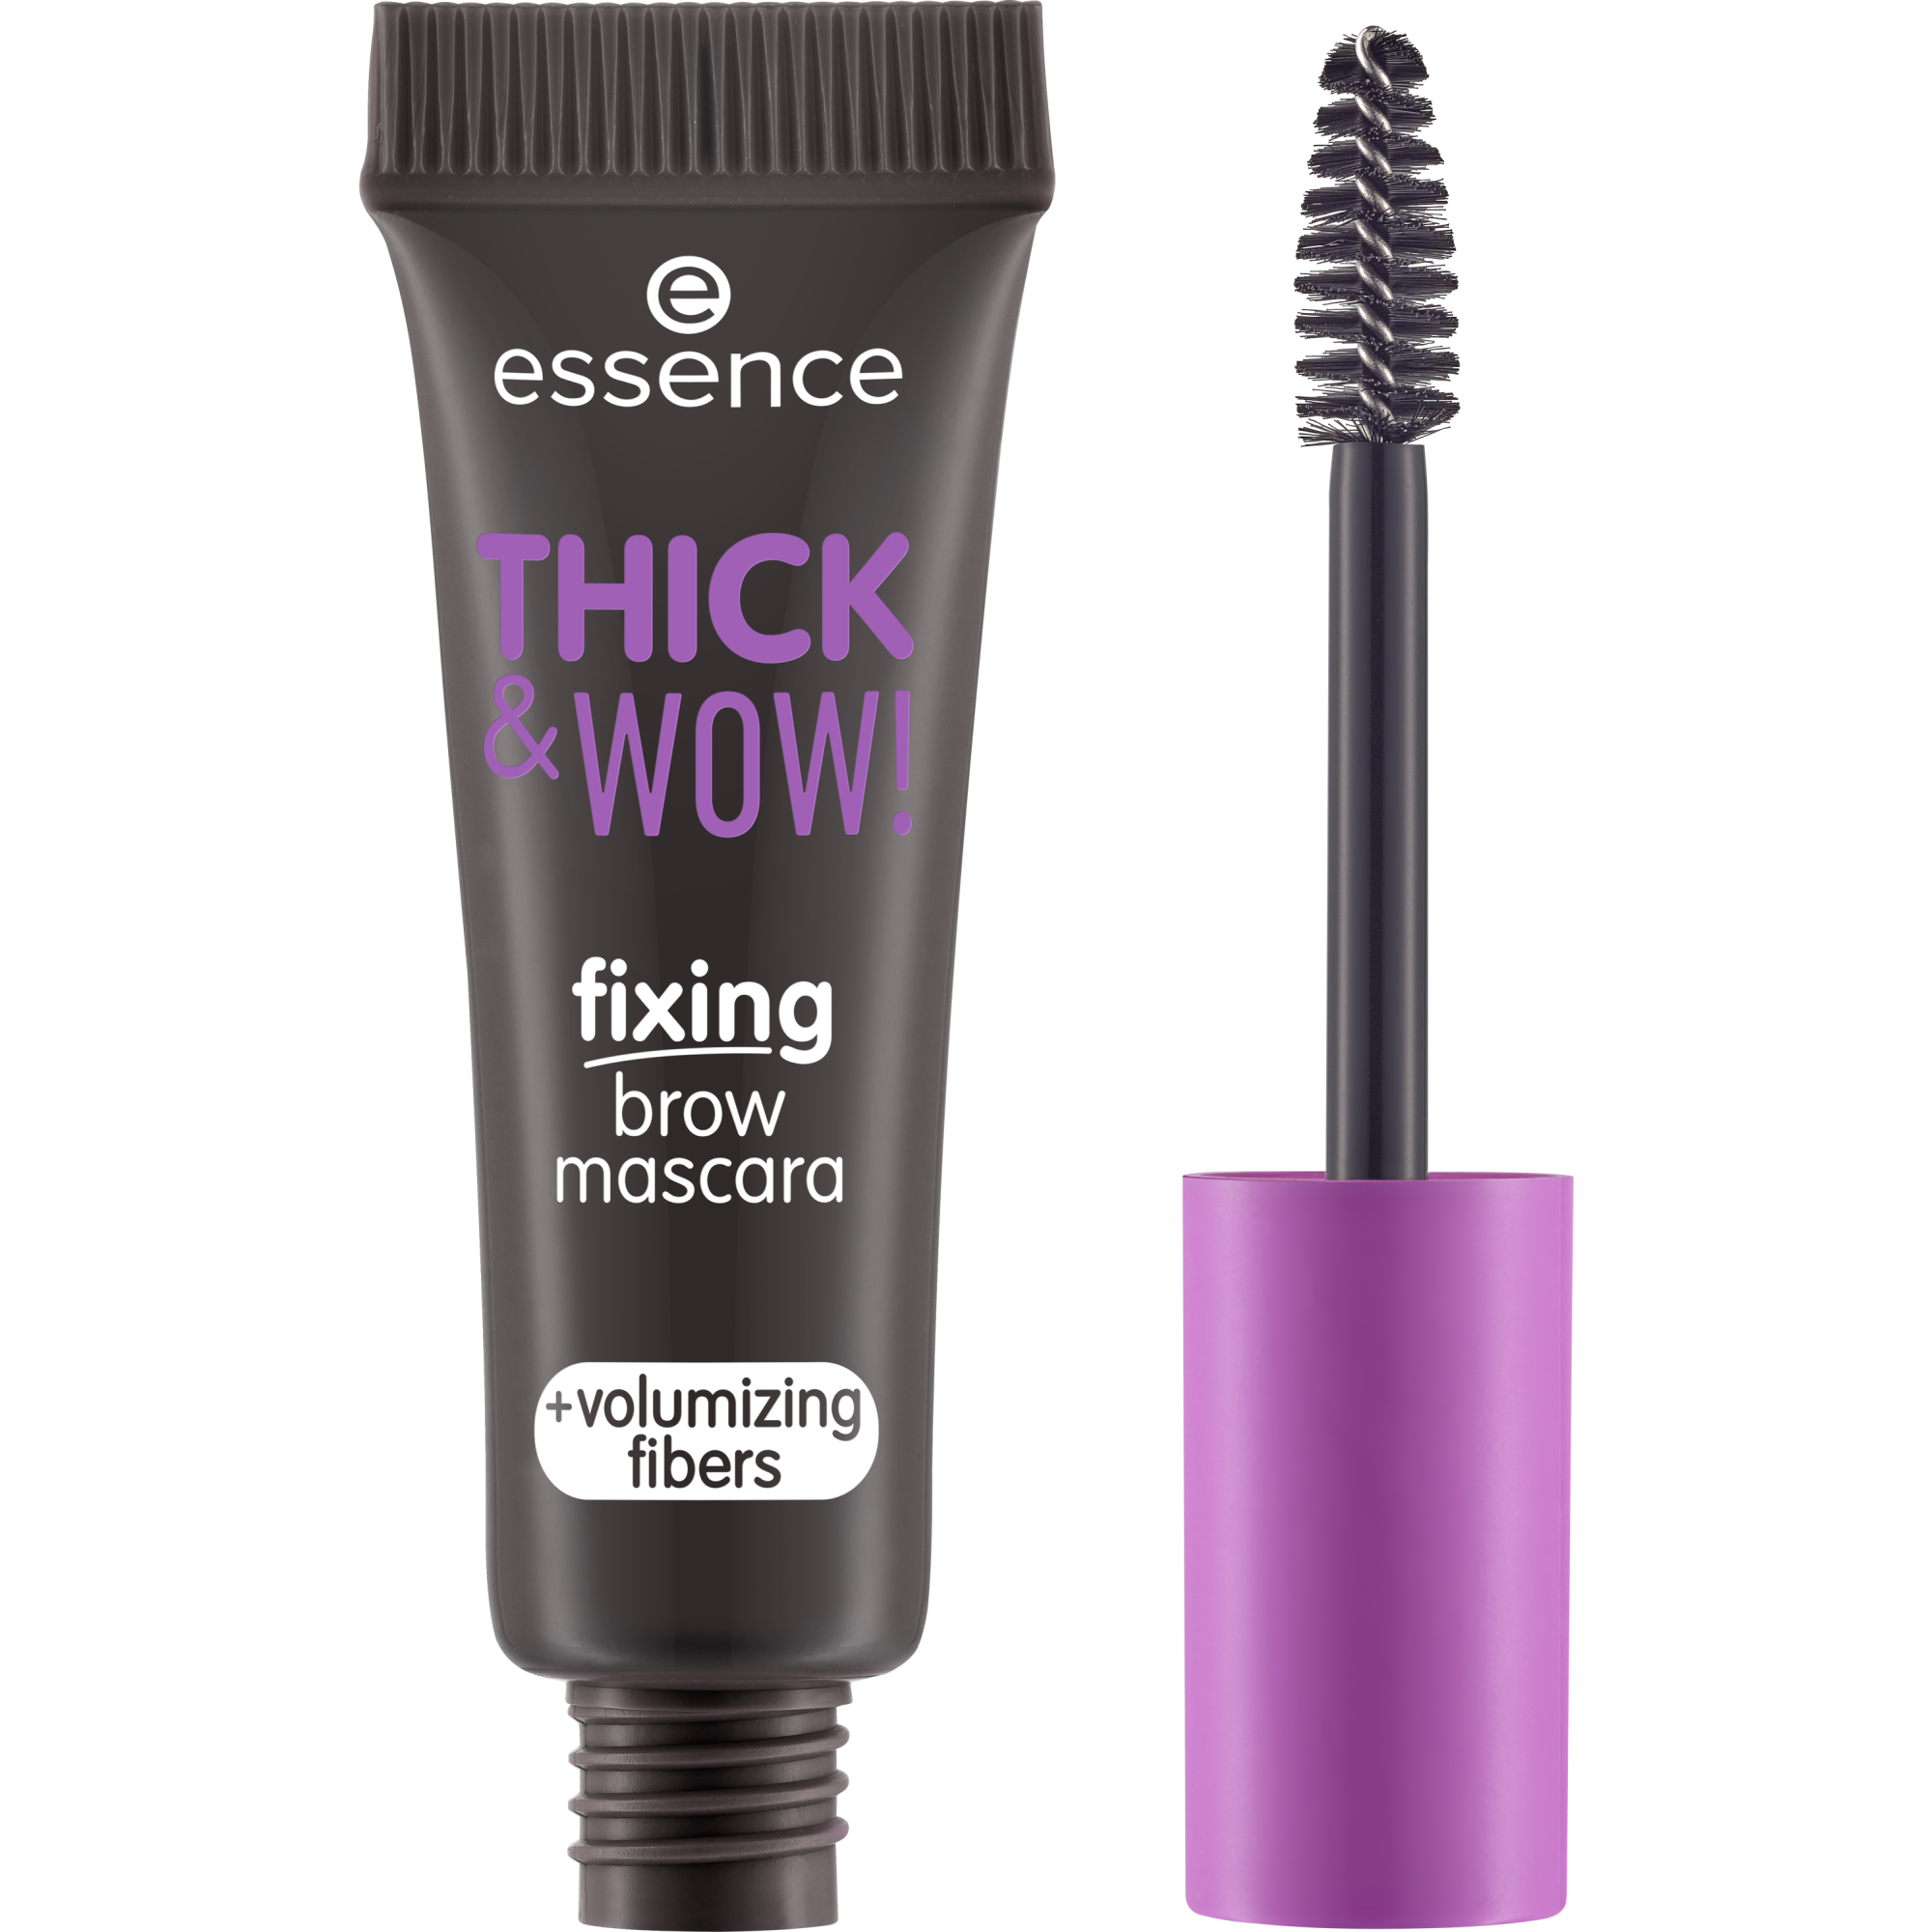 THICK & WOW! fixing brow mascara